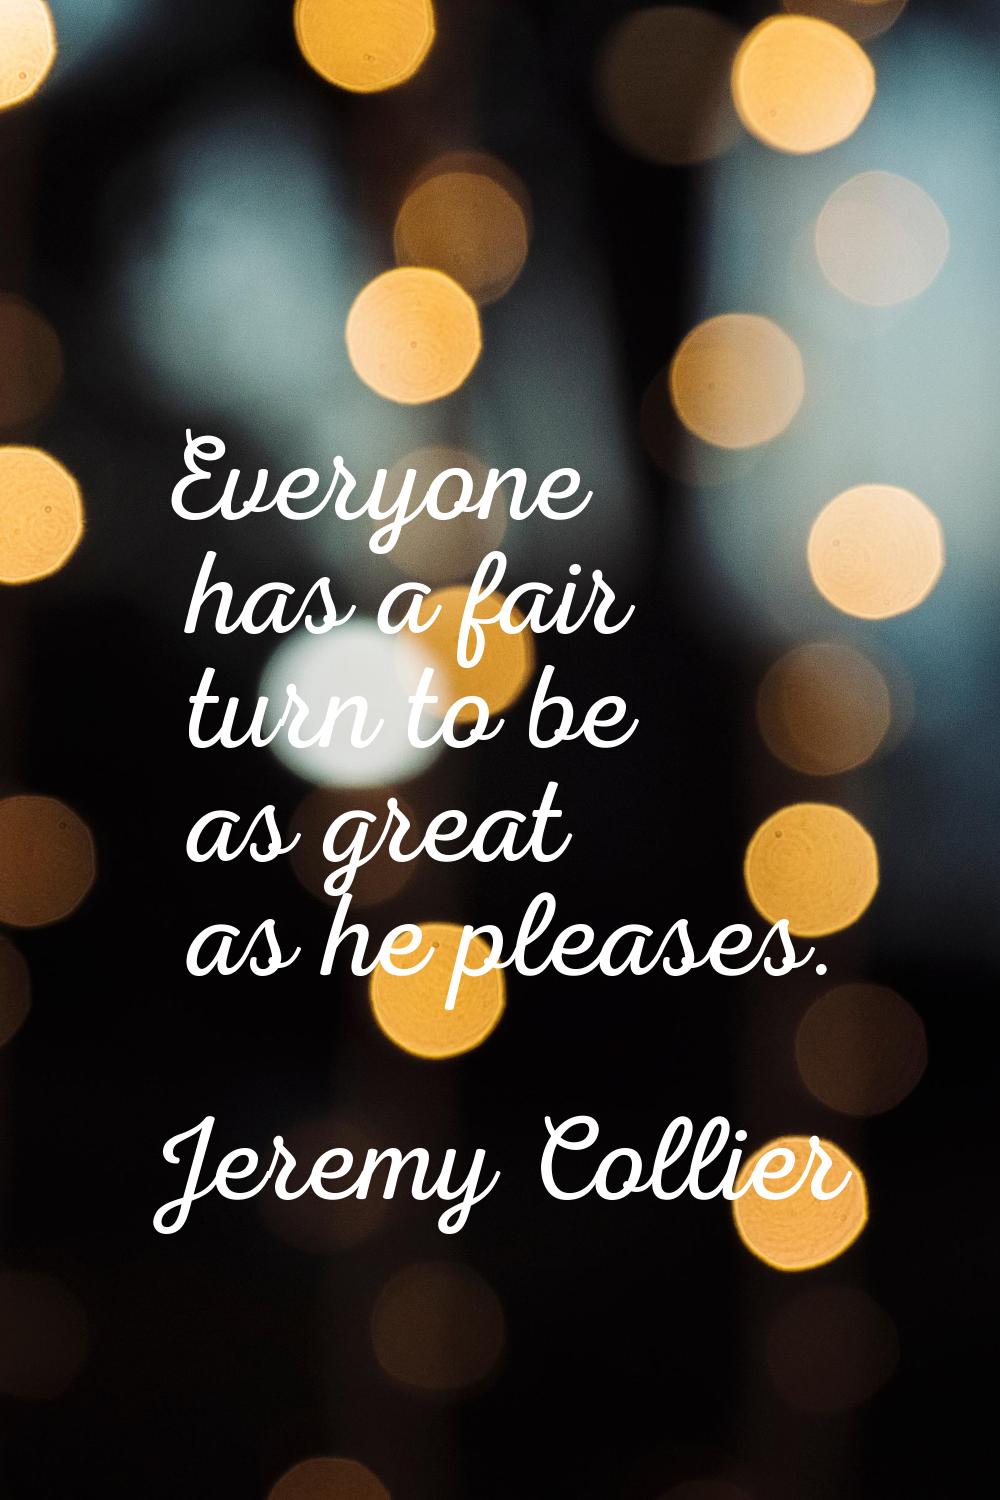 Everyone has a fair turn to be as great as he pleases.